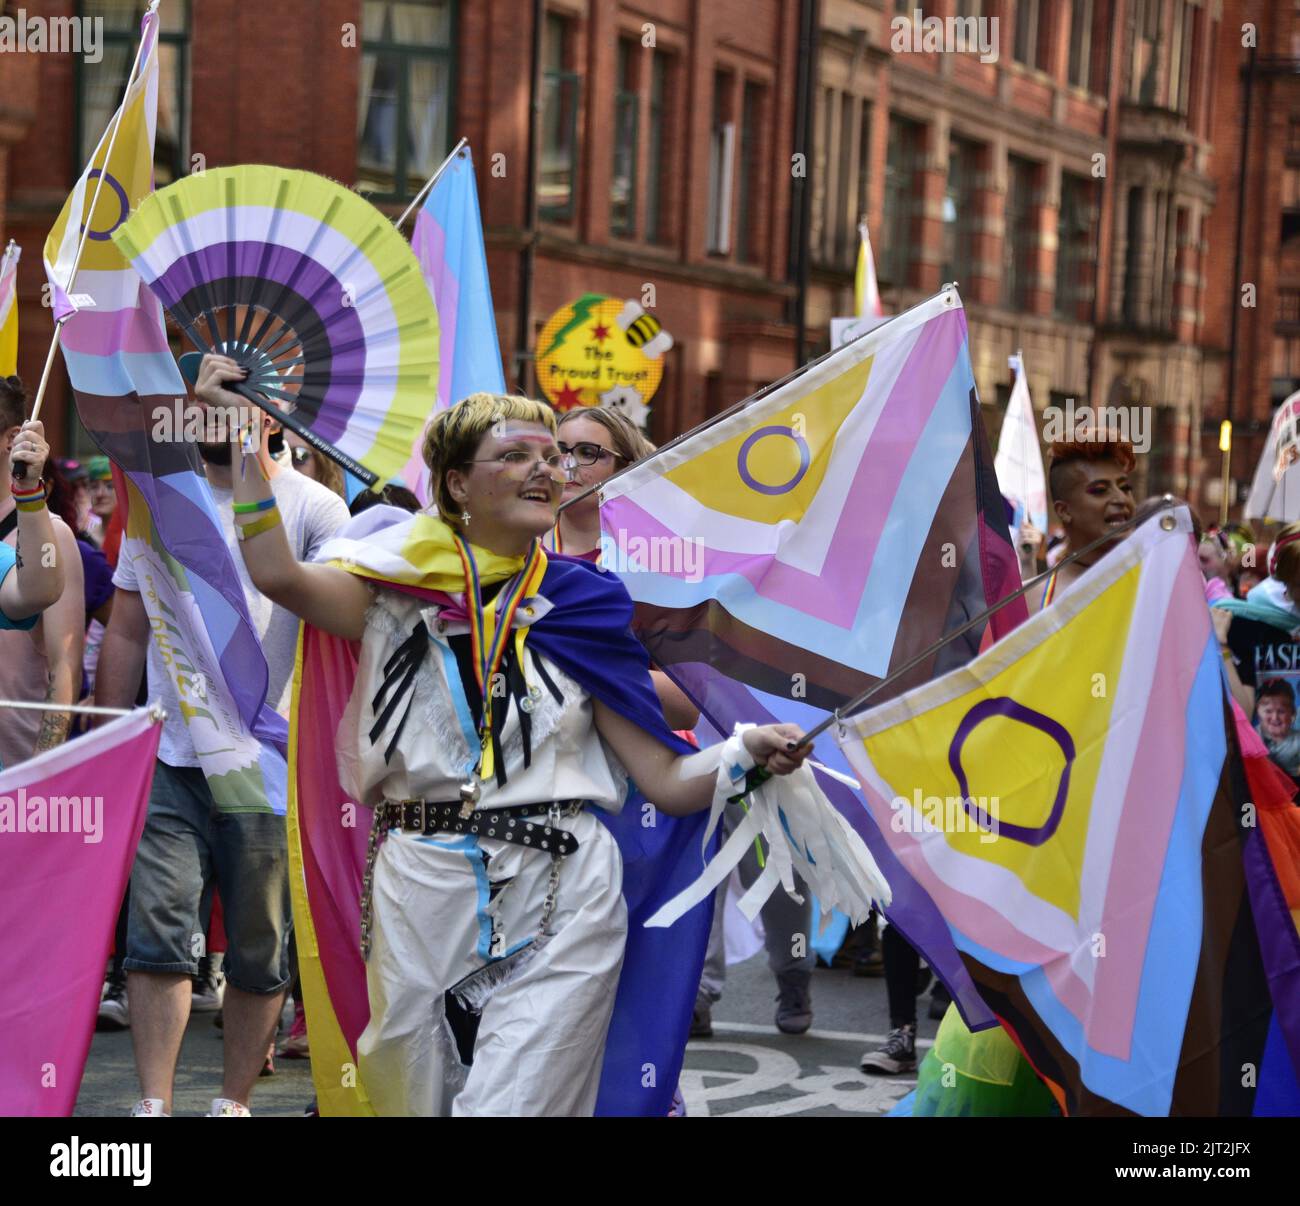 Manchester, UK. 27th August, 2022. Participants take part in the LGBTQ+ Pride parade, central Manchester, UK, as LGBTQ+ Pride continues over the Bank Holiday weekend 26th to 29th August. Organisers say: 'Manchester Pride is one of the UK's leading LGBTQ+ charities. Our vision is a world where LGBTQ+ people are free to live and love without prejudice. We’re part of a global Pride movement celebrating LGBTQ+ equality and challenging discrimination.' Credit: Terry Waller/Alamy Live News Stock Photo